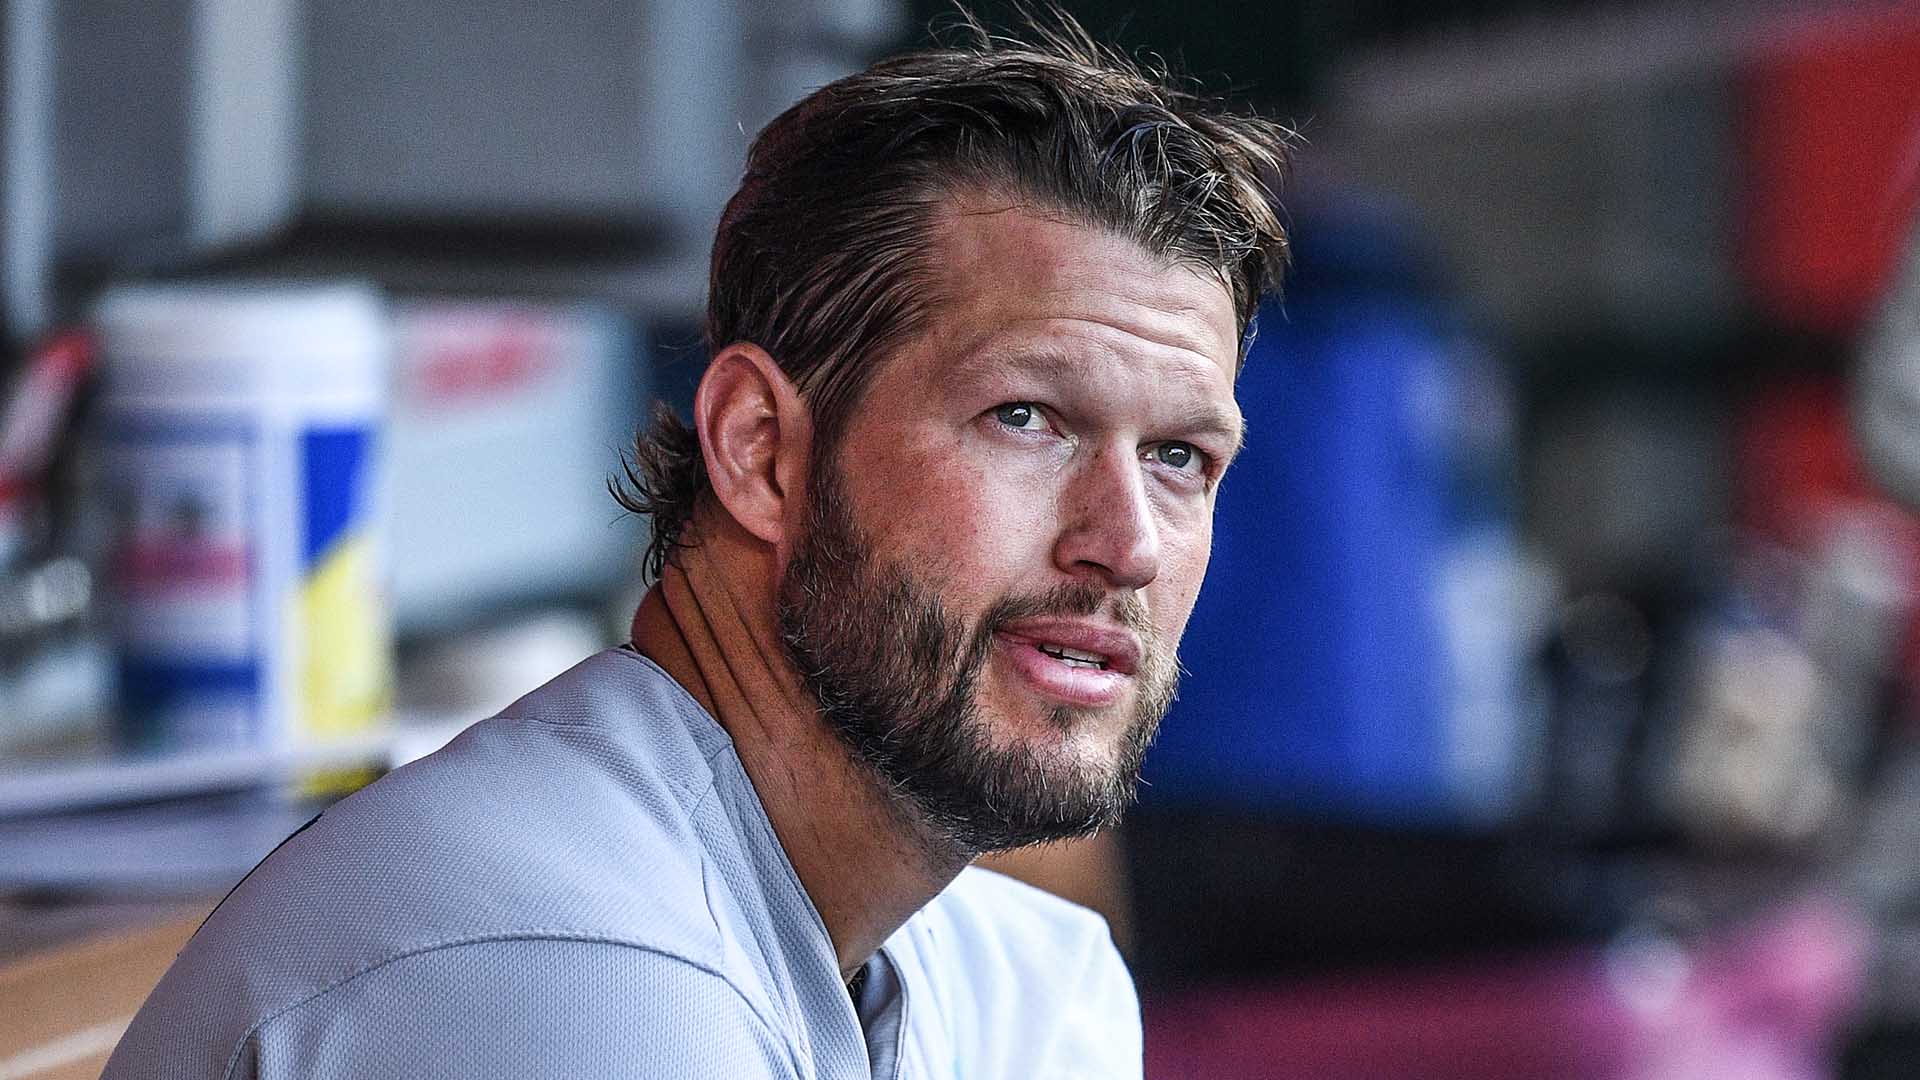 MLB All-Star Game 2022: Kershaw to start for NL as lineups revealed